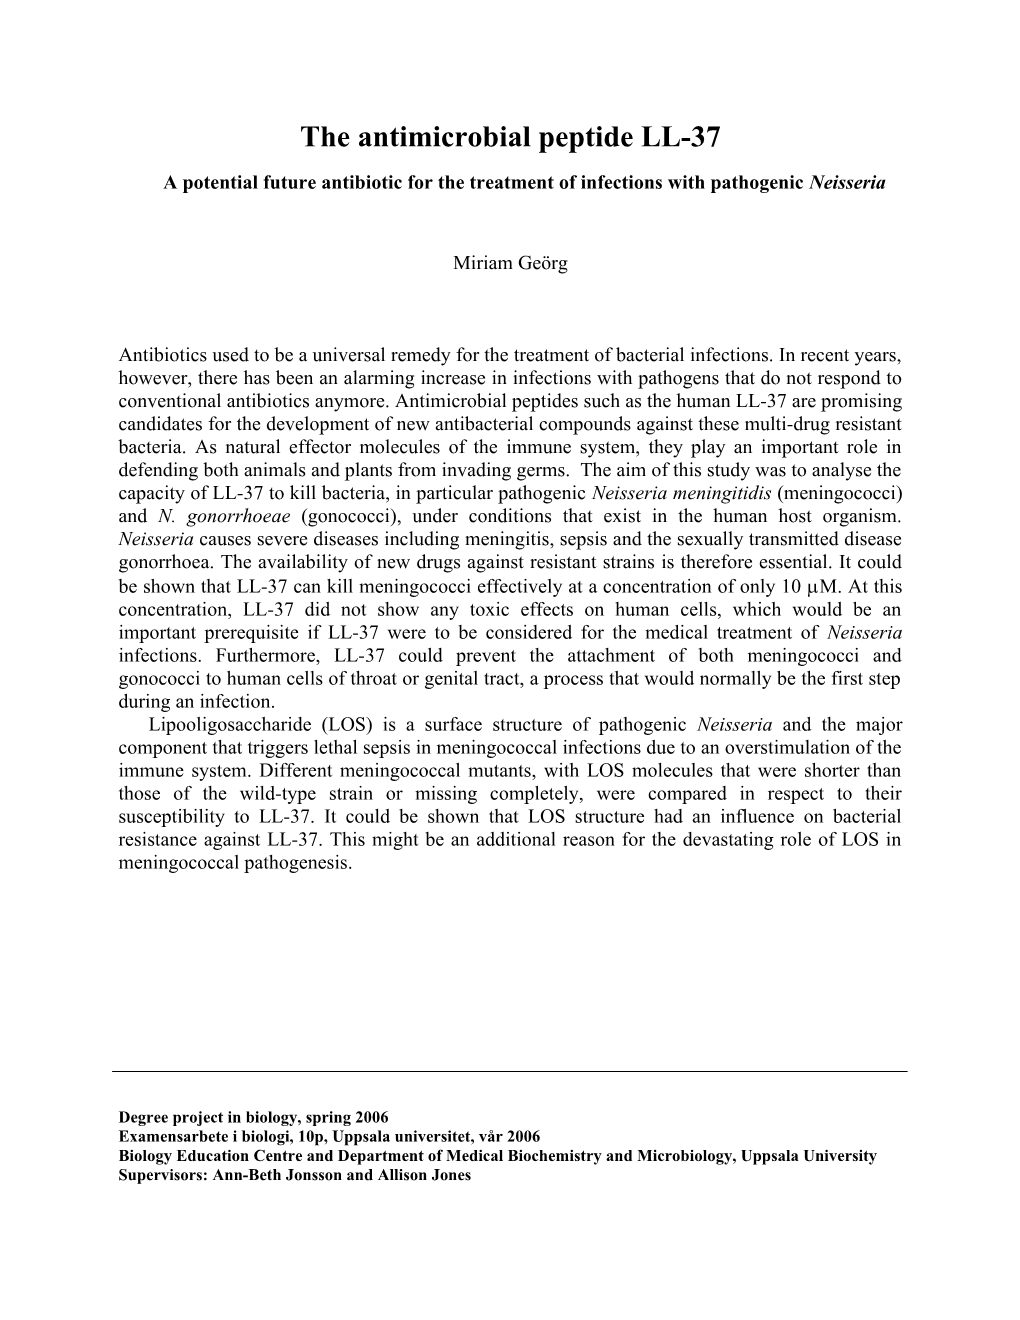 The Antimicrobial Peptide LL-37